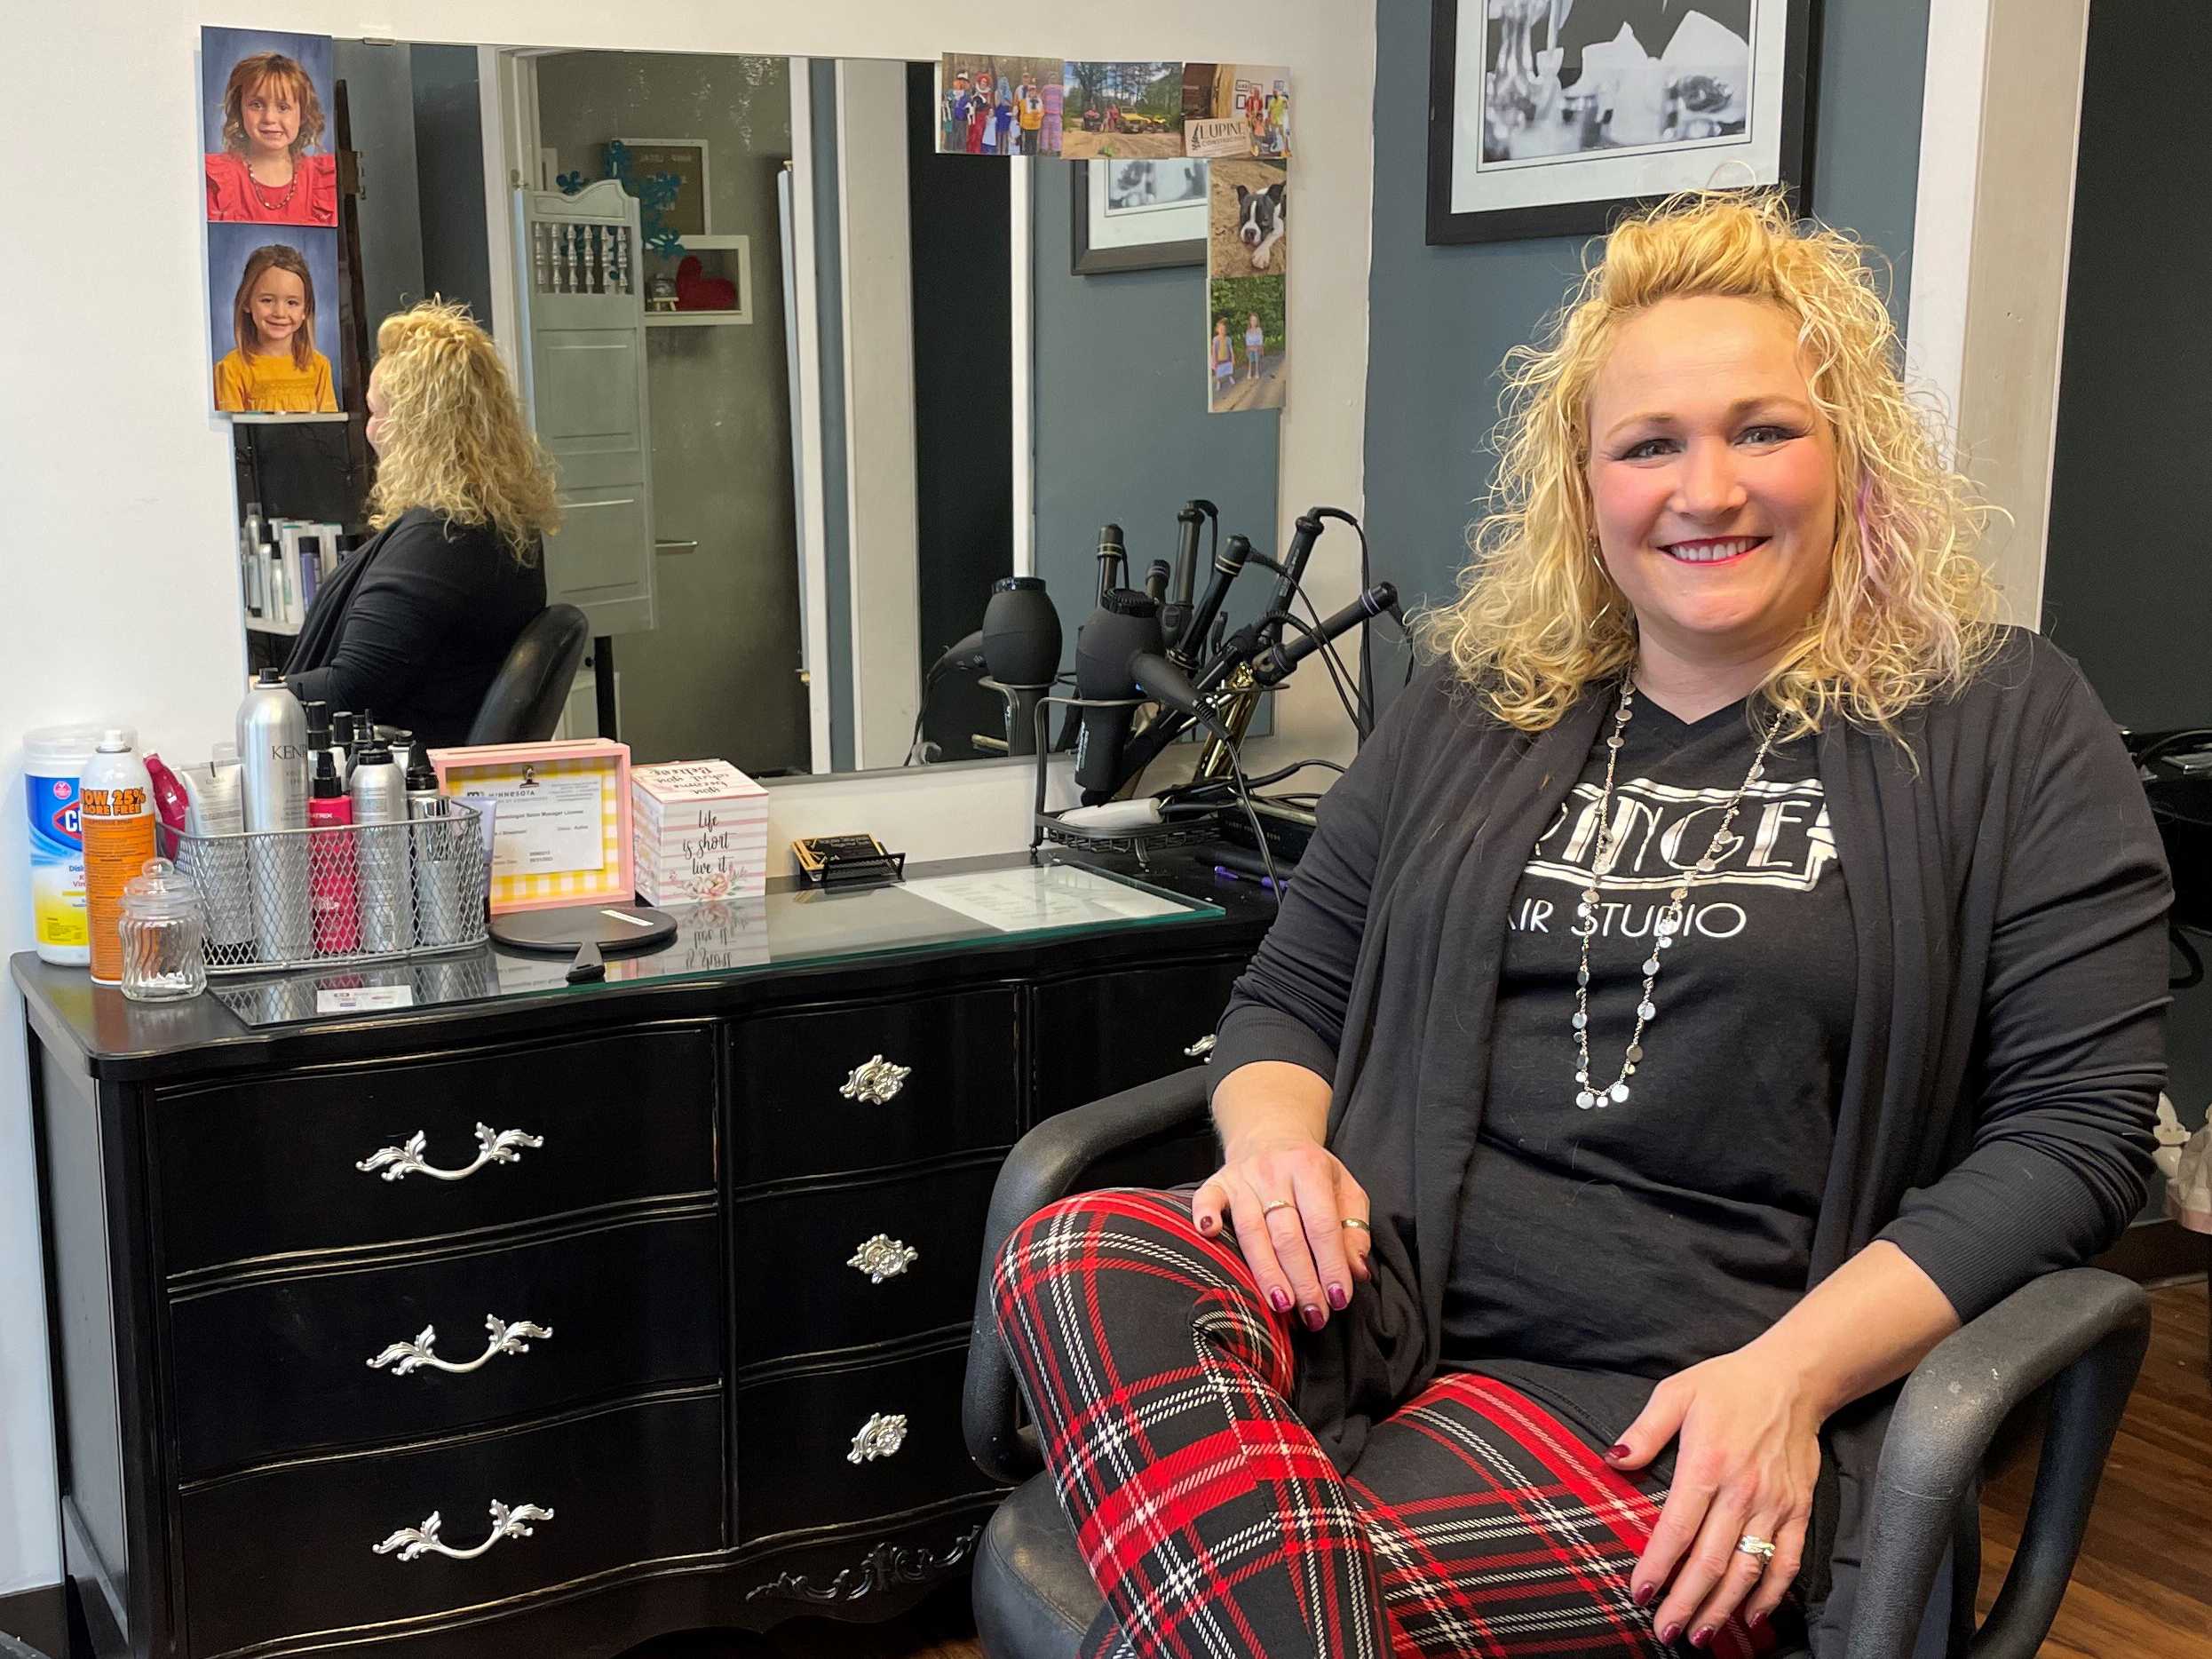 Tracee Strazzinski sitting in her chair at a hair salon